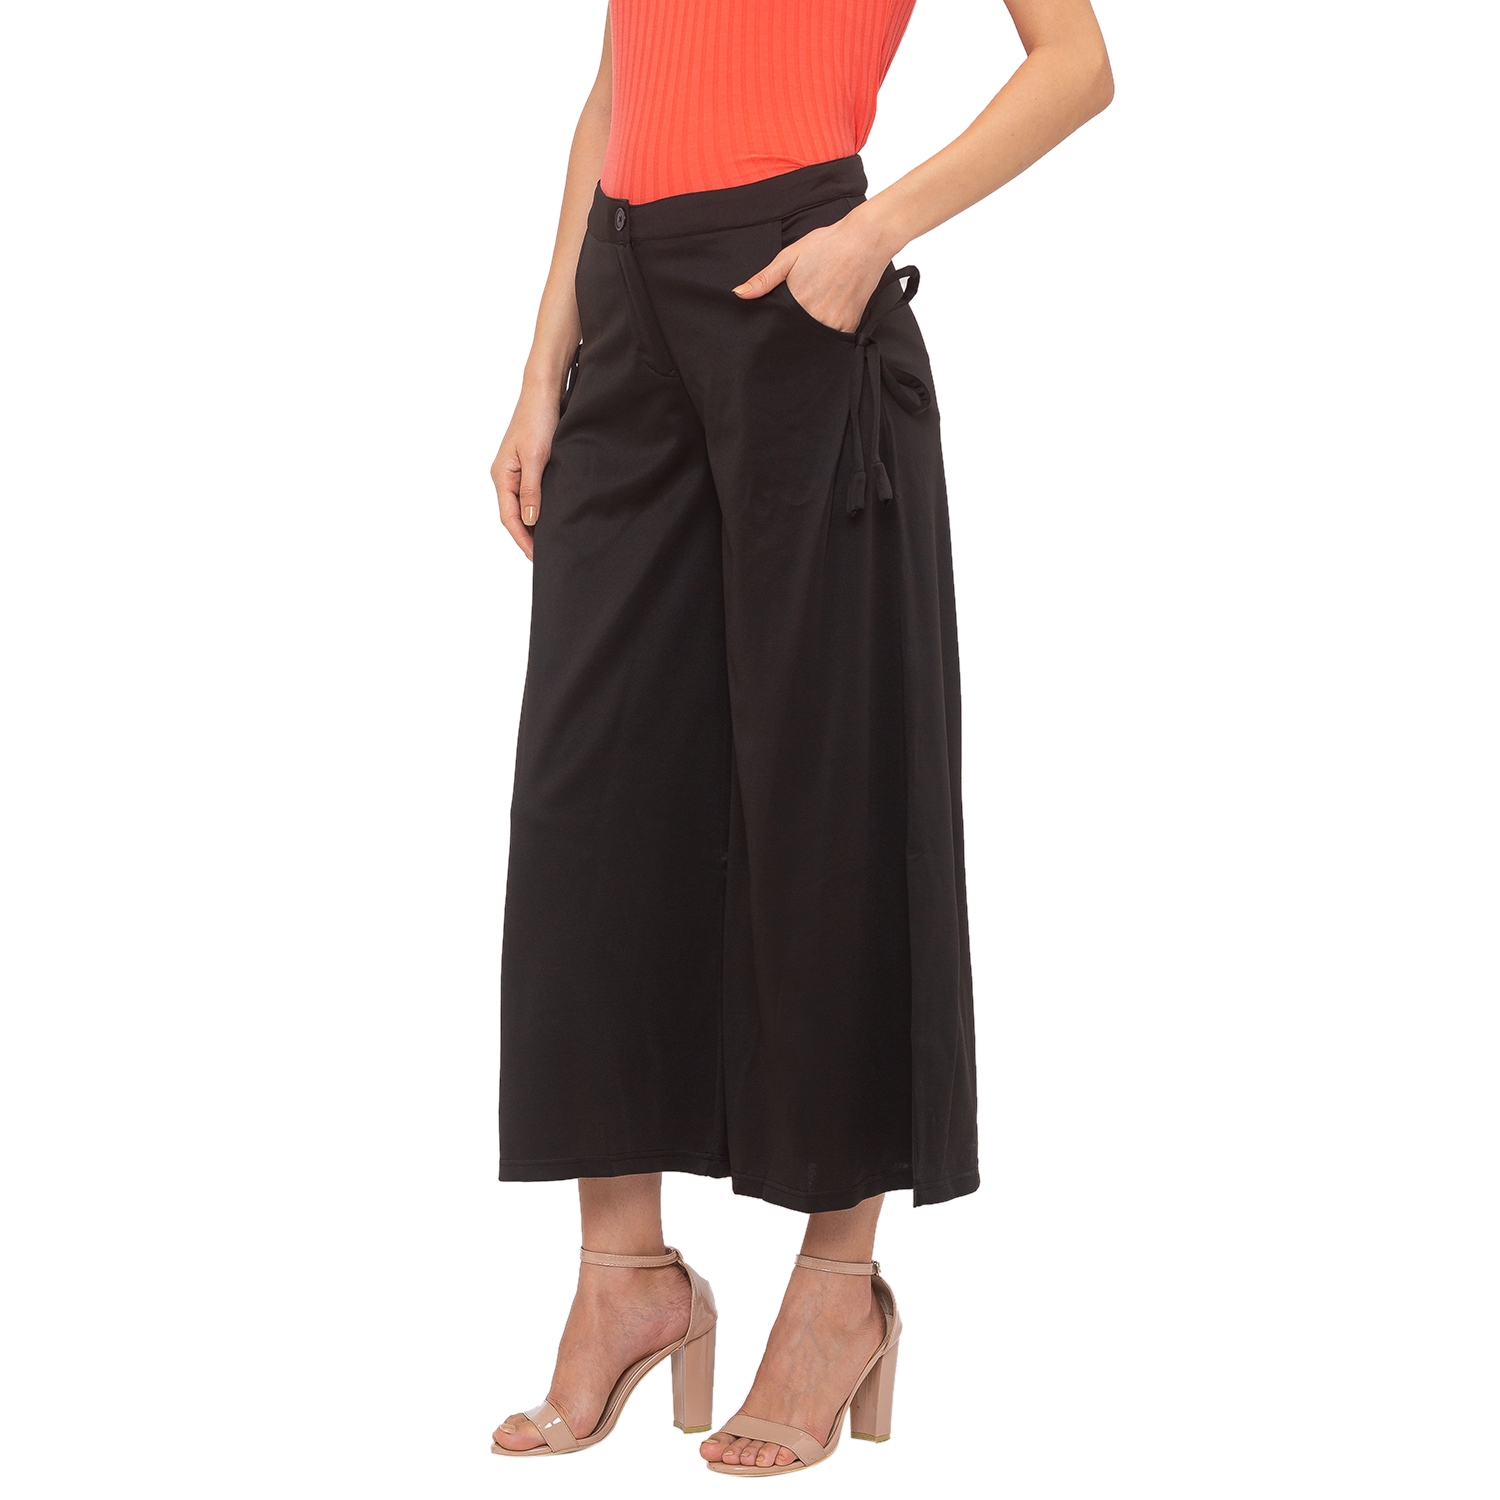 globus | Women's Black Polyester Solid Culottes 1